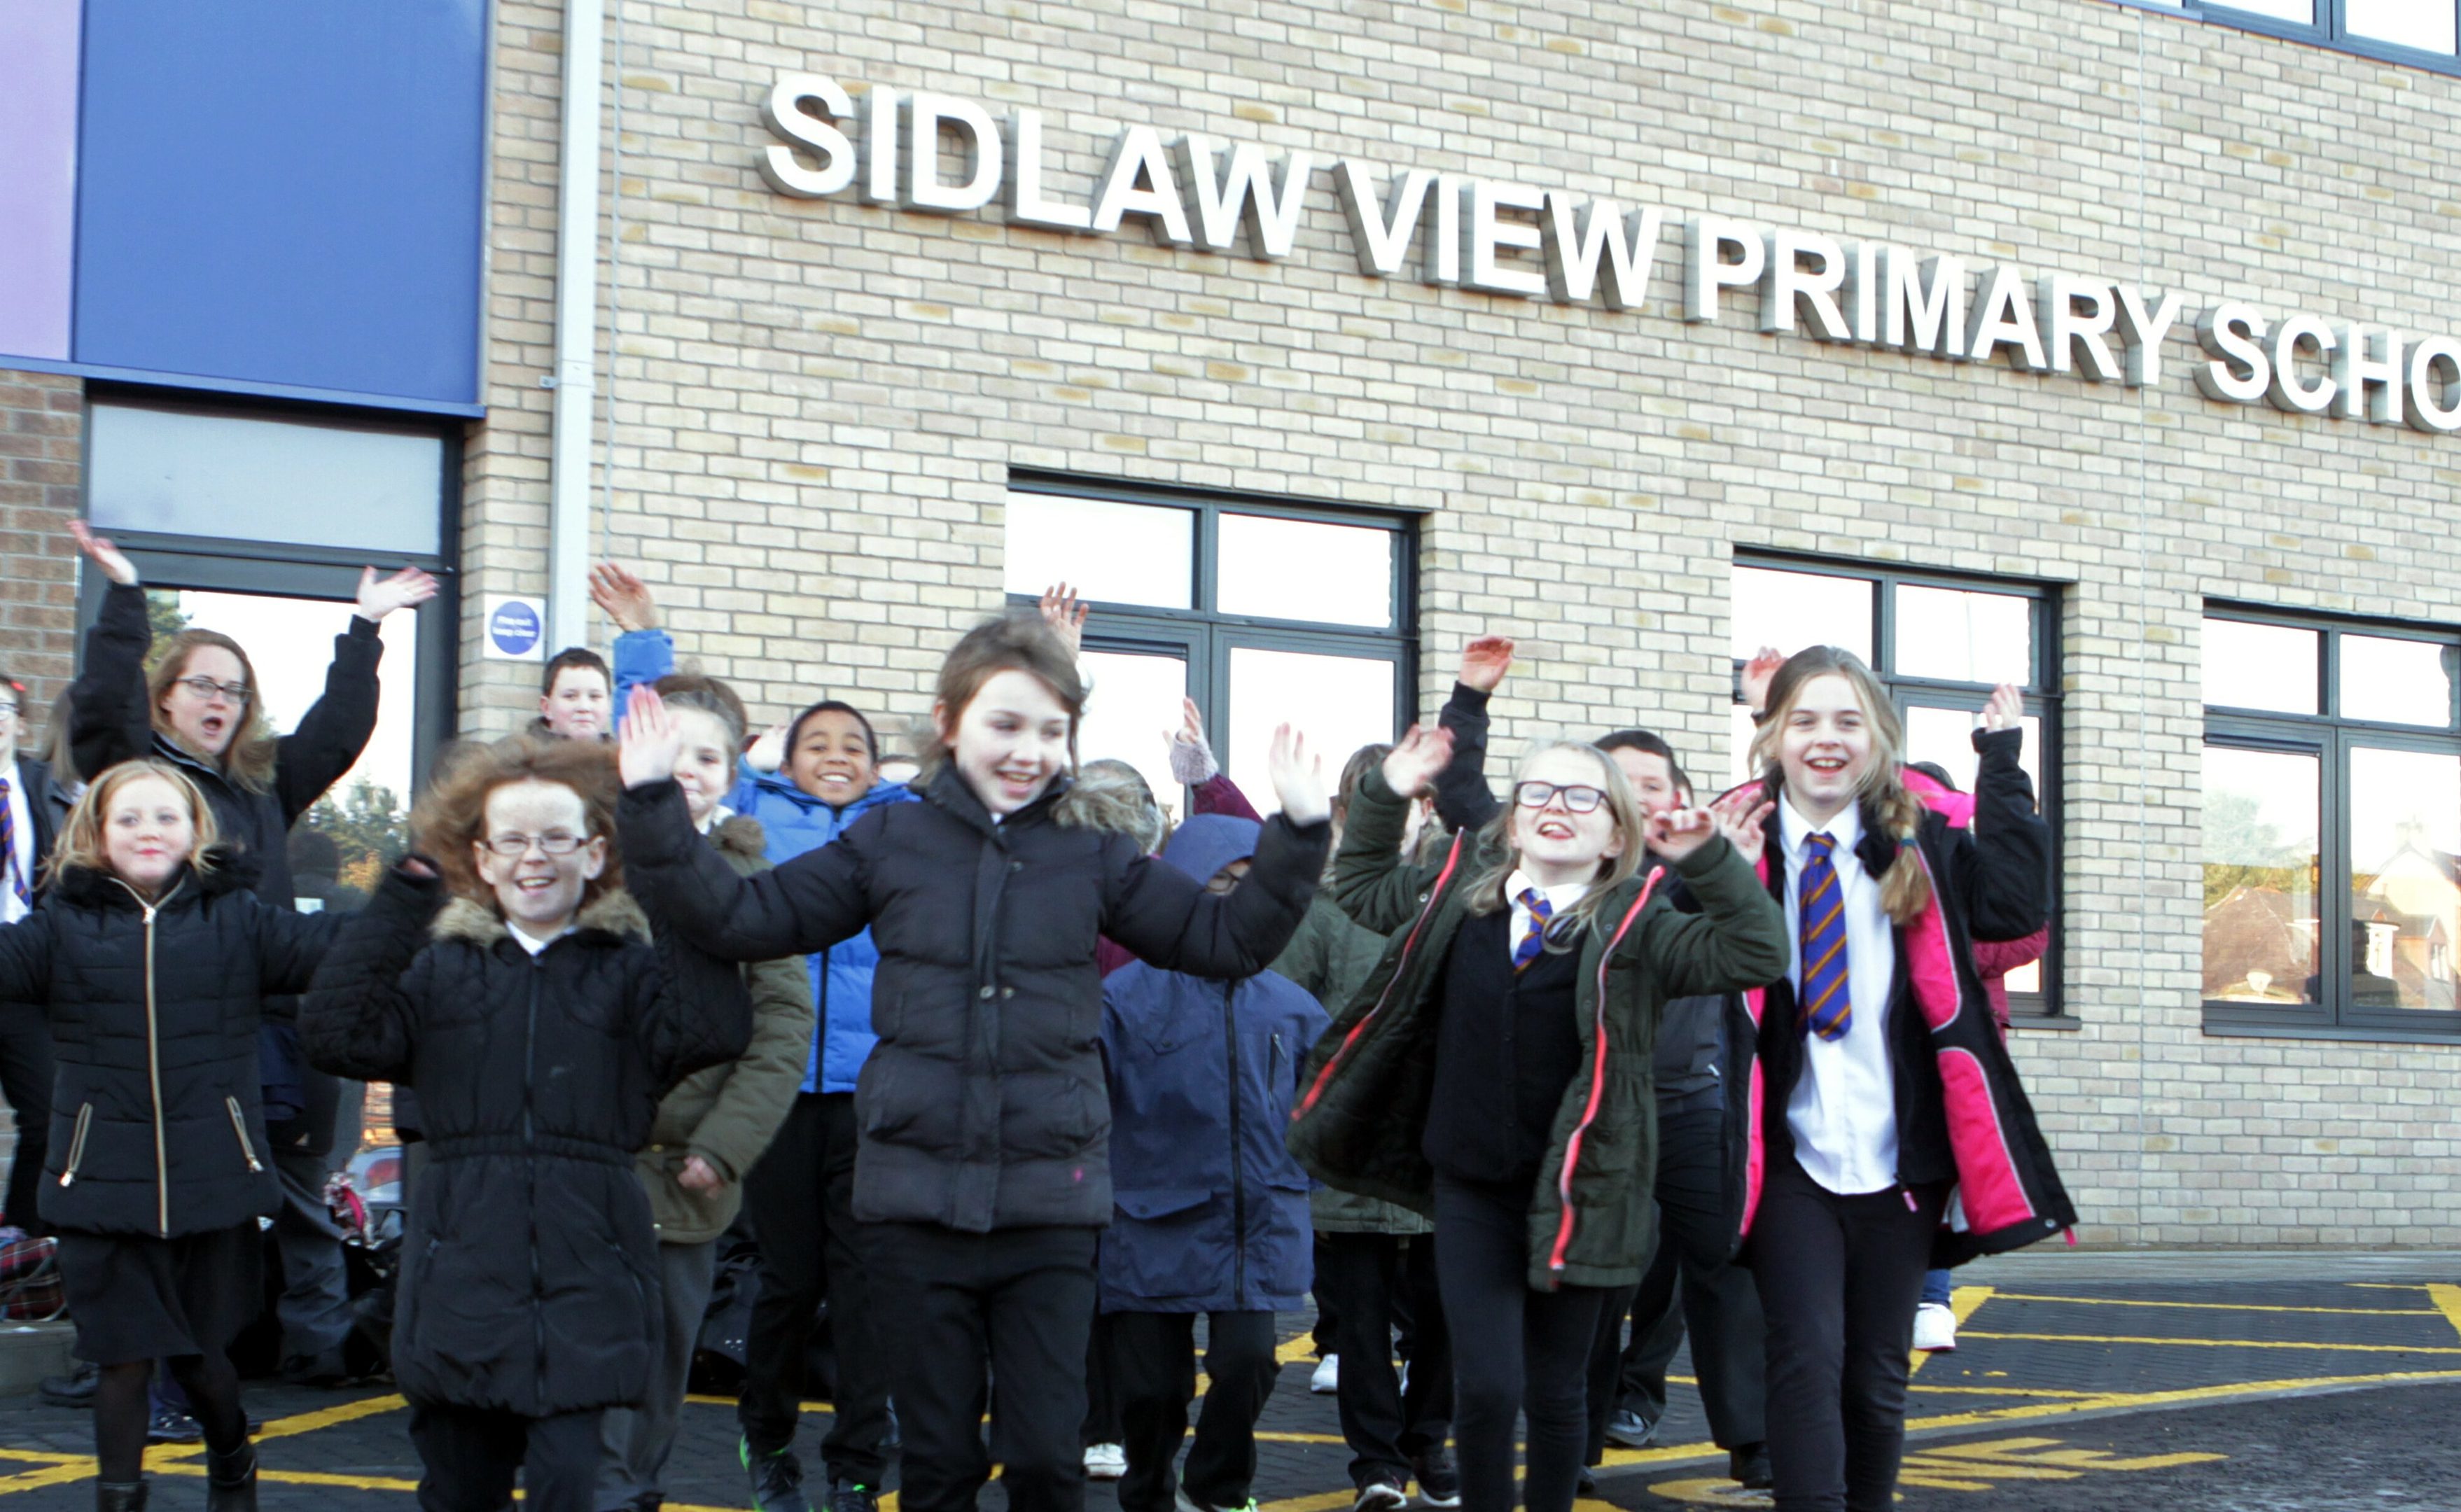 Pupils were delighted to gain access to their new school.